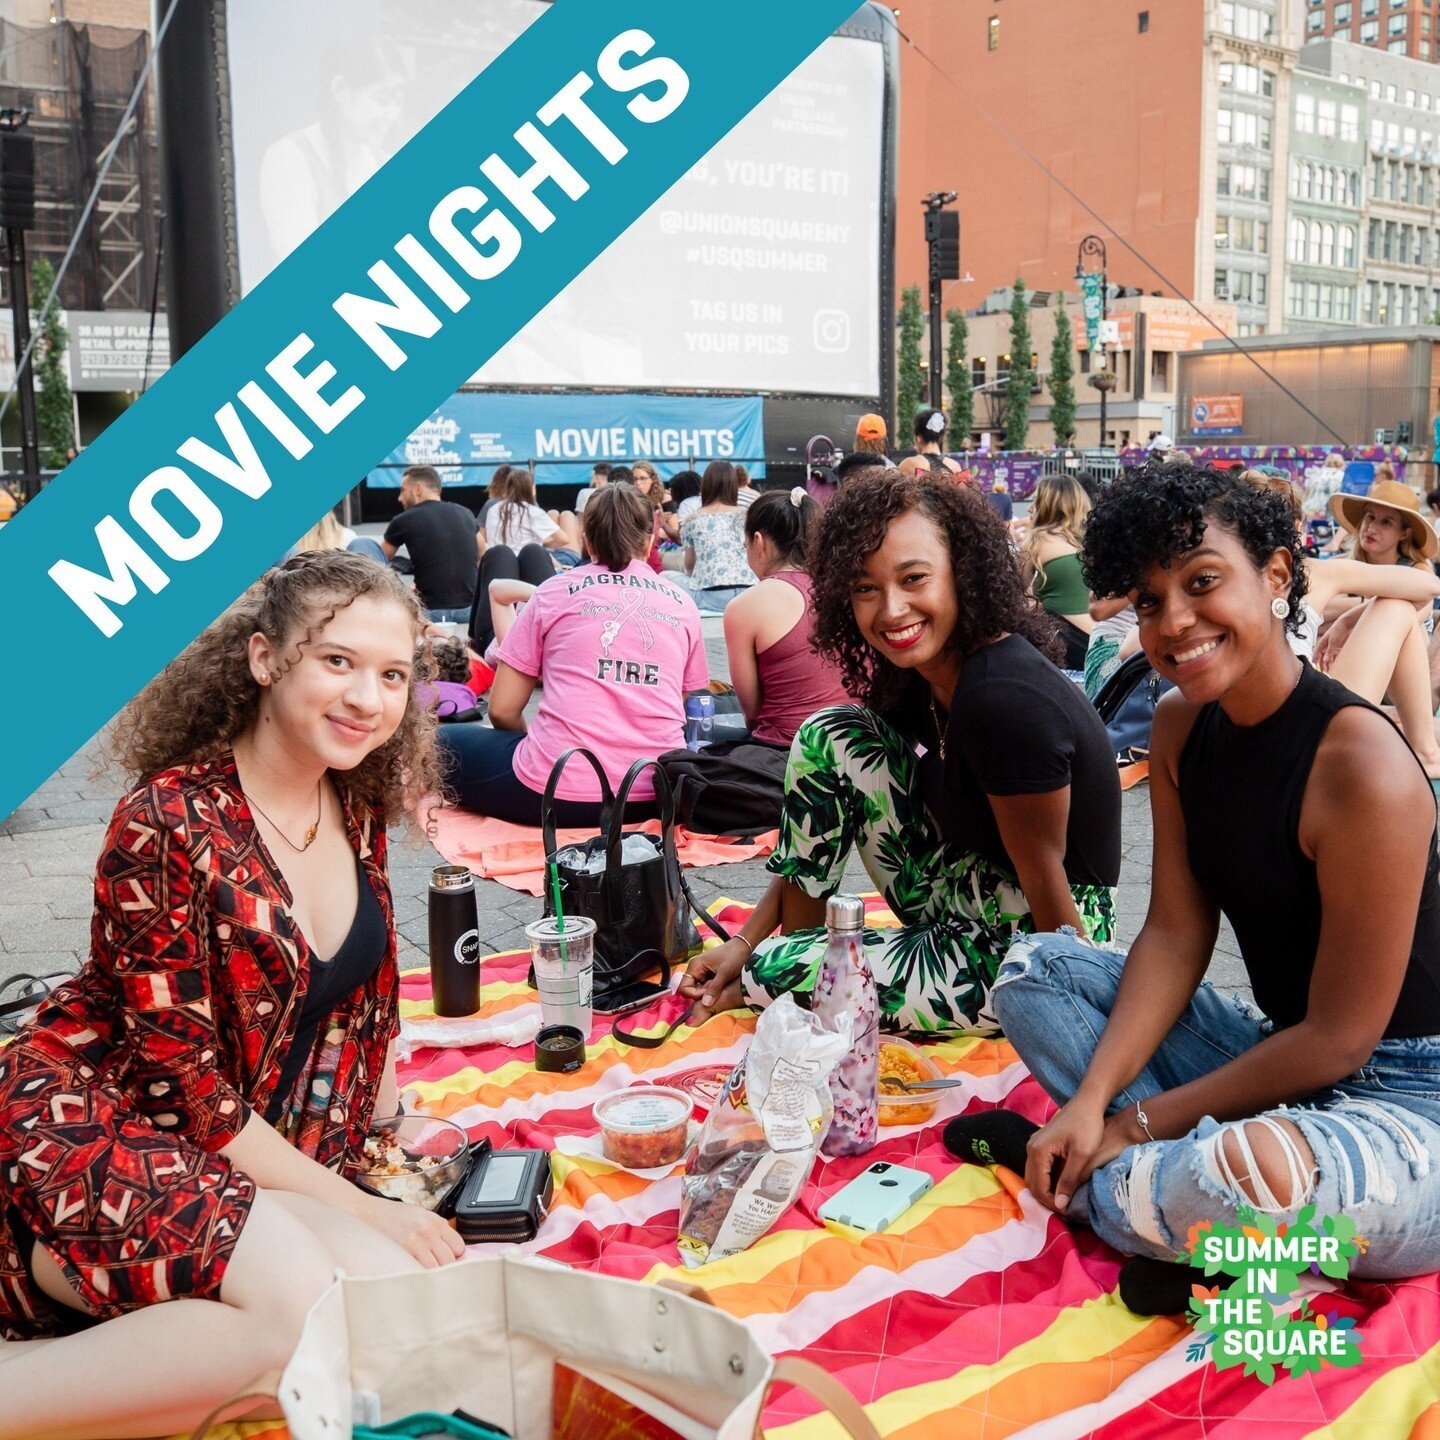 Are you ready for movies in Union Square Park? 🎥🤩

Starting tomorrow, bring your blankets and popcorn for family-friendly movies on the Center Lawn. All movies begin at 8 PM!

Movie Summer Lineup: 
🍿 Thursday, July 13 - Moana
🍿 Thursday, July 20 